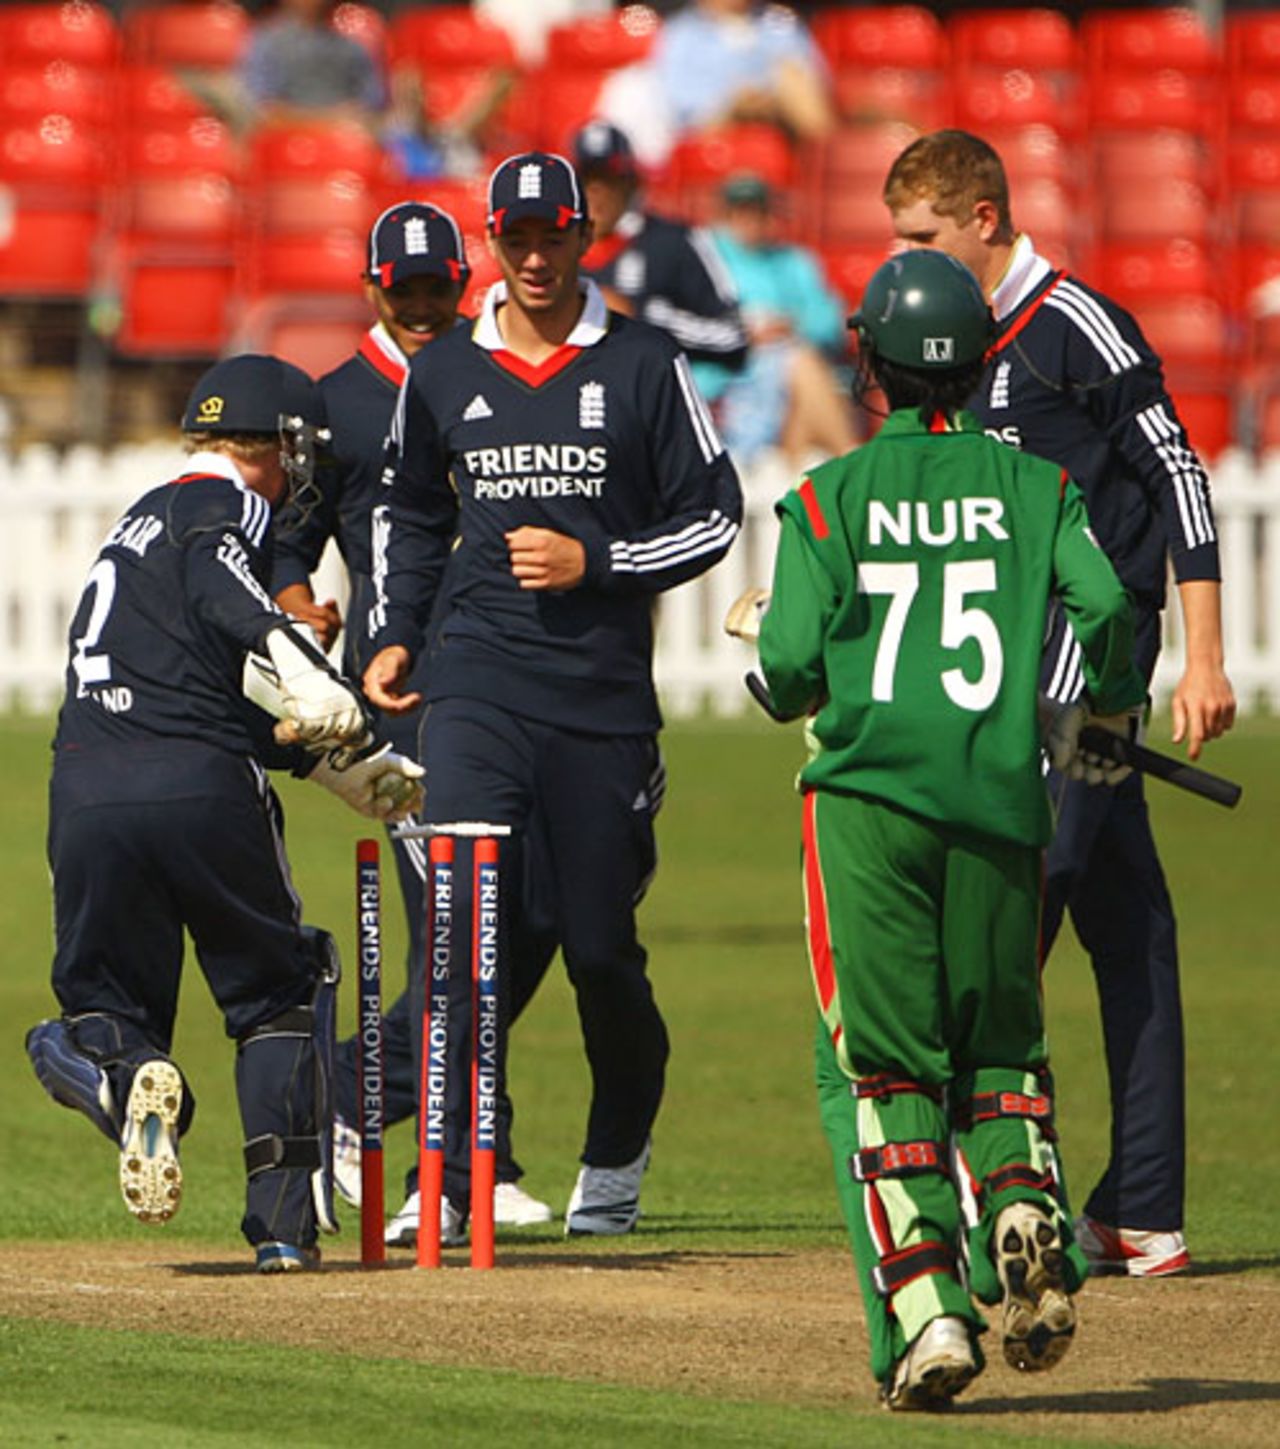 Adam Wheater whips off the bails to run out Noor Hossain, England U-19 v Bangladesh U-19, 1st ODI, Grace Road, July 18, 2009